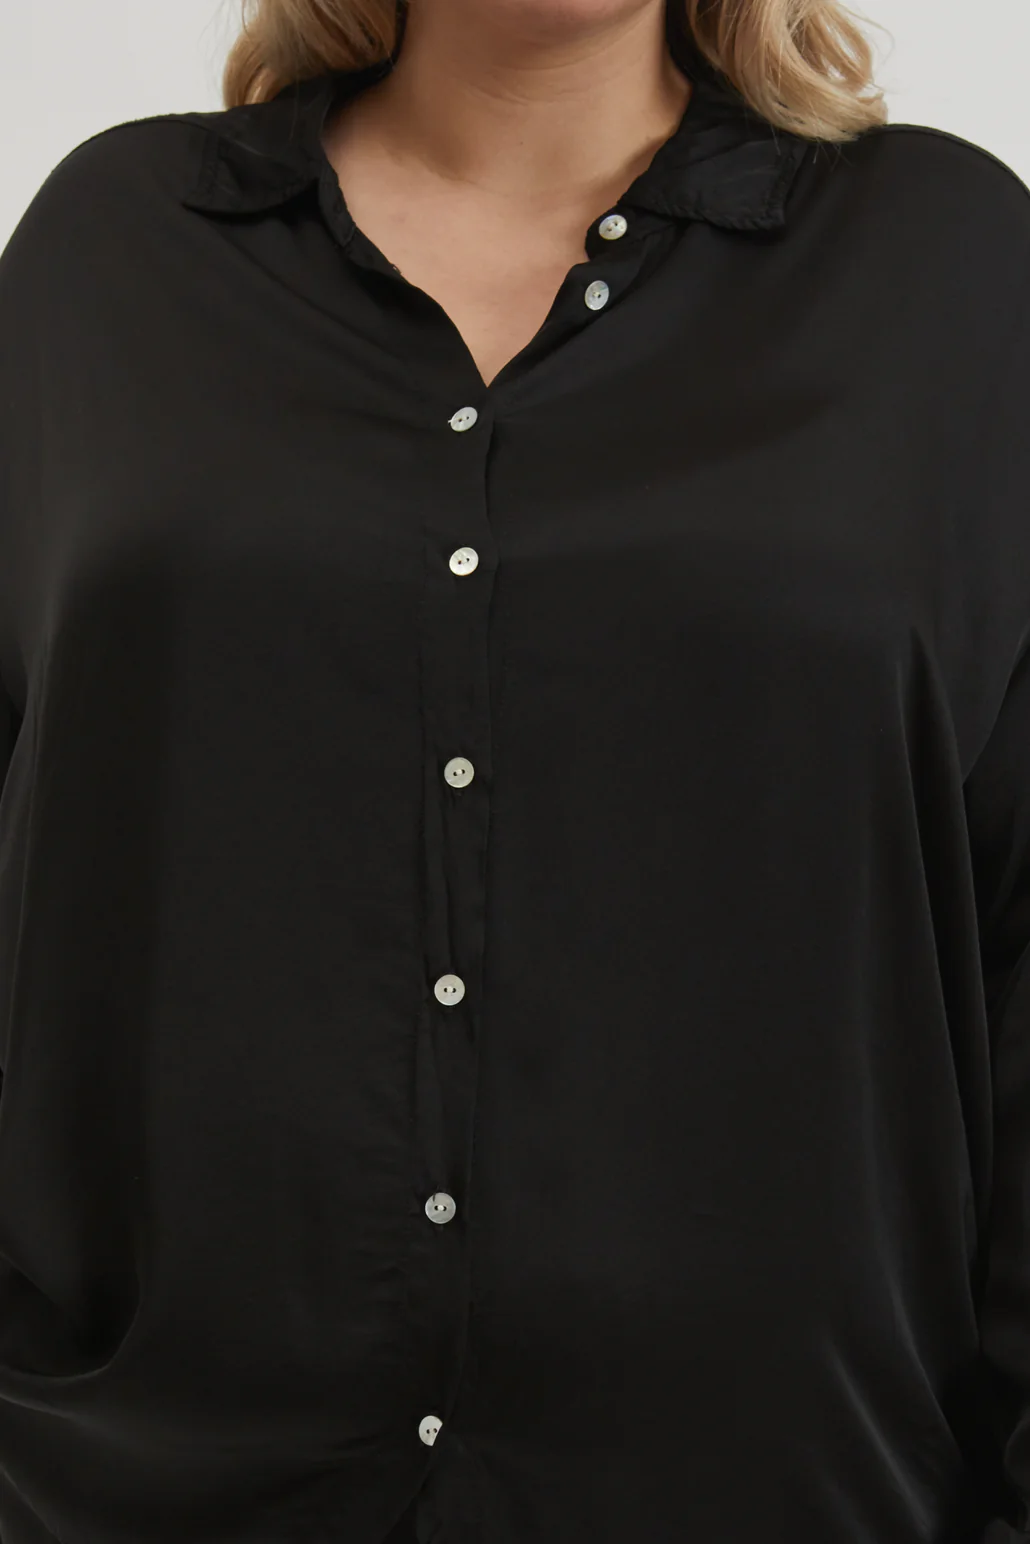 A very close up image of the button front detail of the Jet Silky Shirt on a female model